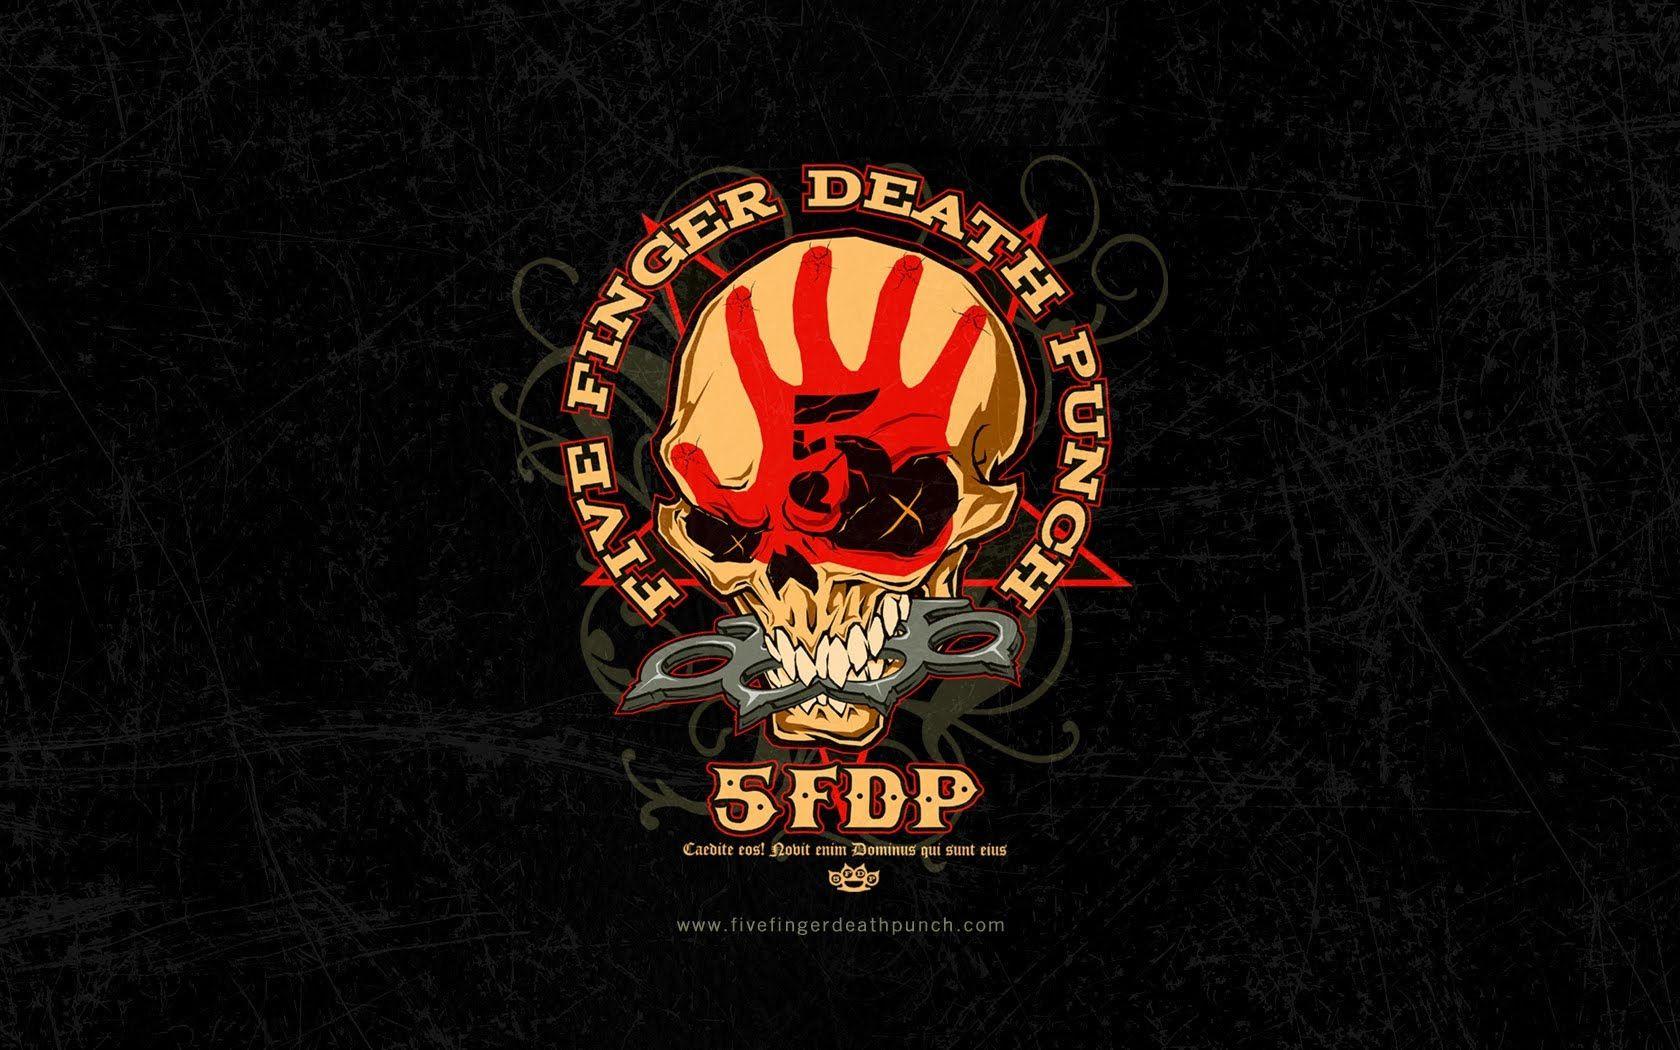 5FDP Way of the Fist (2007) Album Review